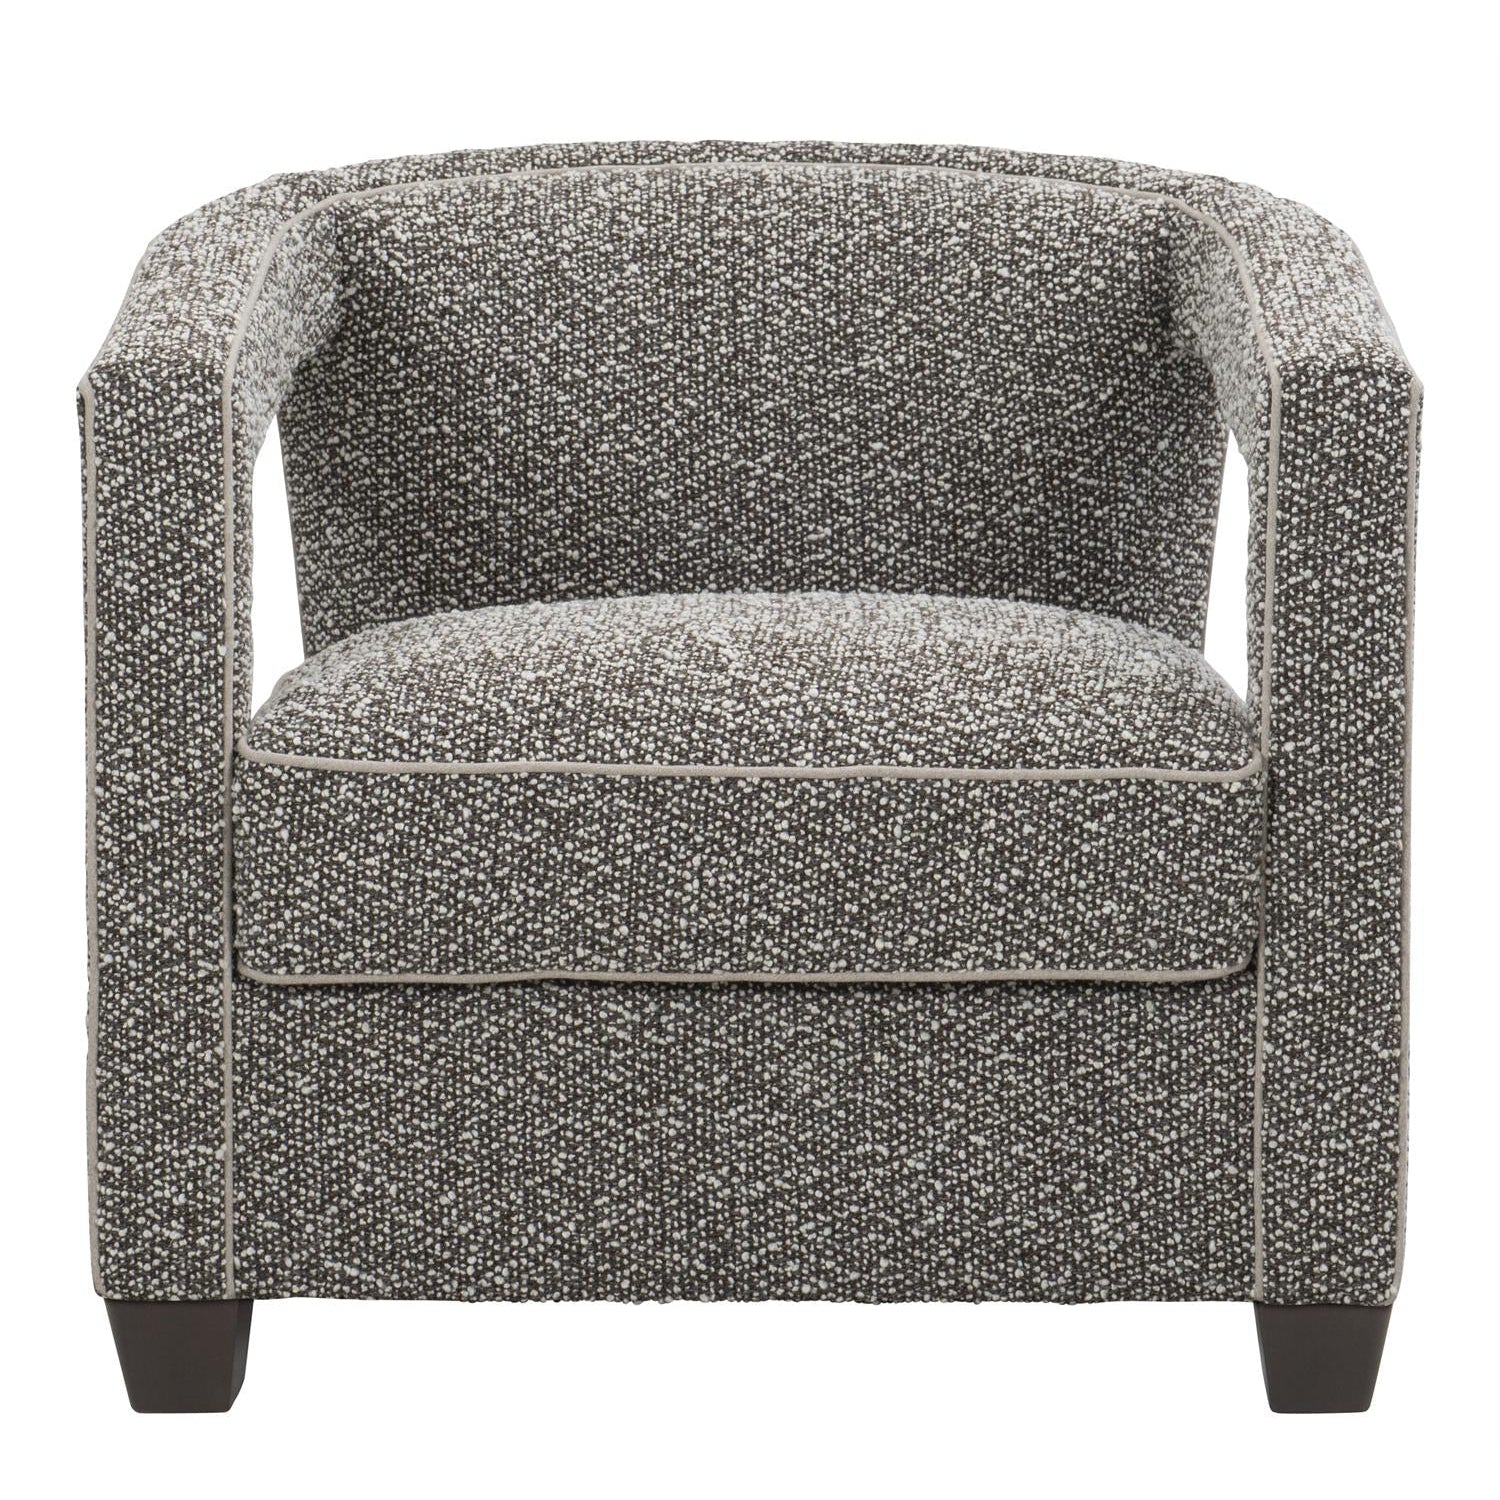 Bernhardt, Alana Fabric Chair Without Nails